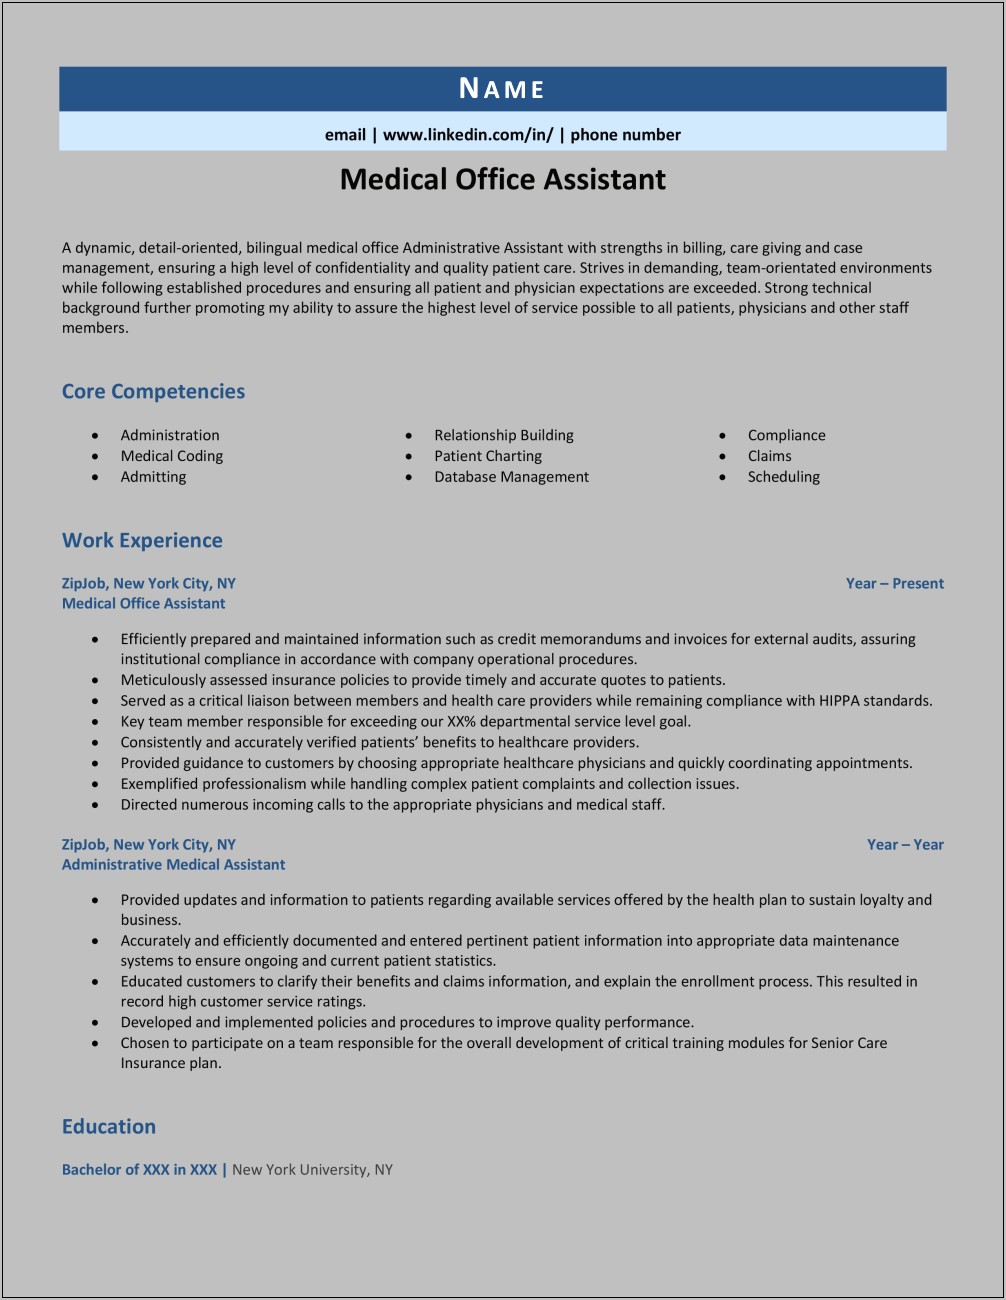 Resume Example For Medical Office Assistant